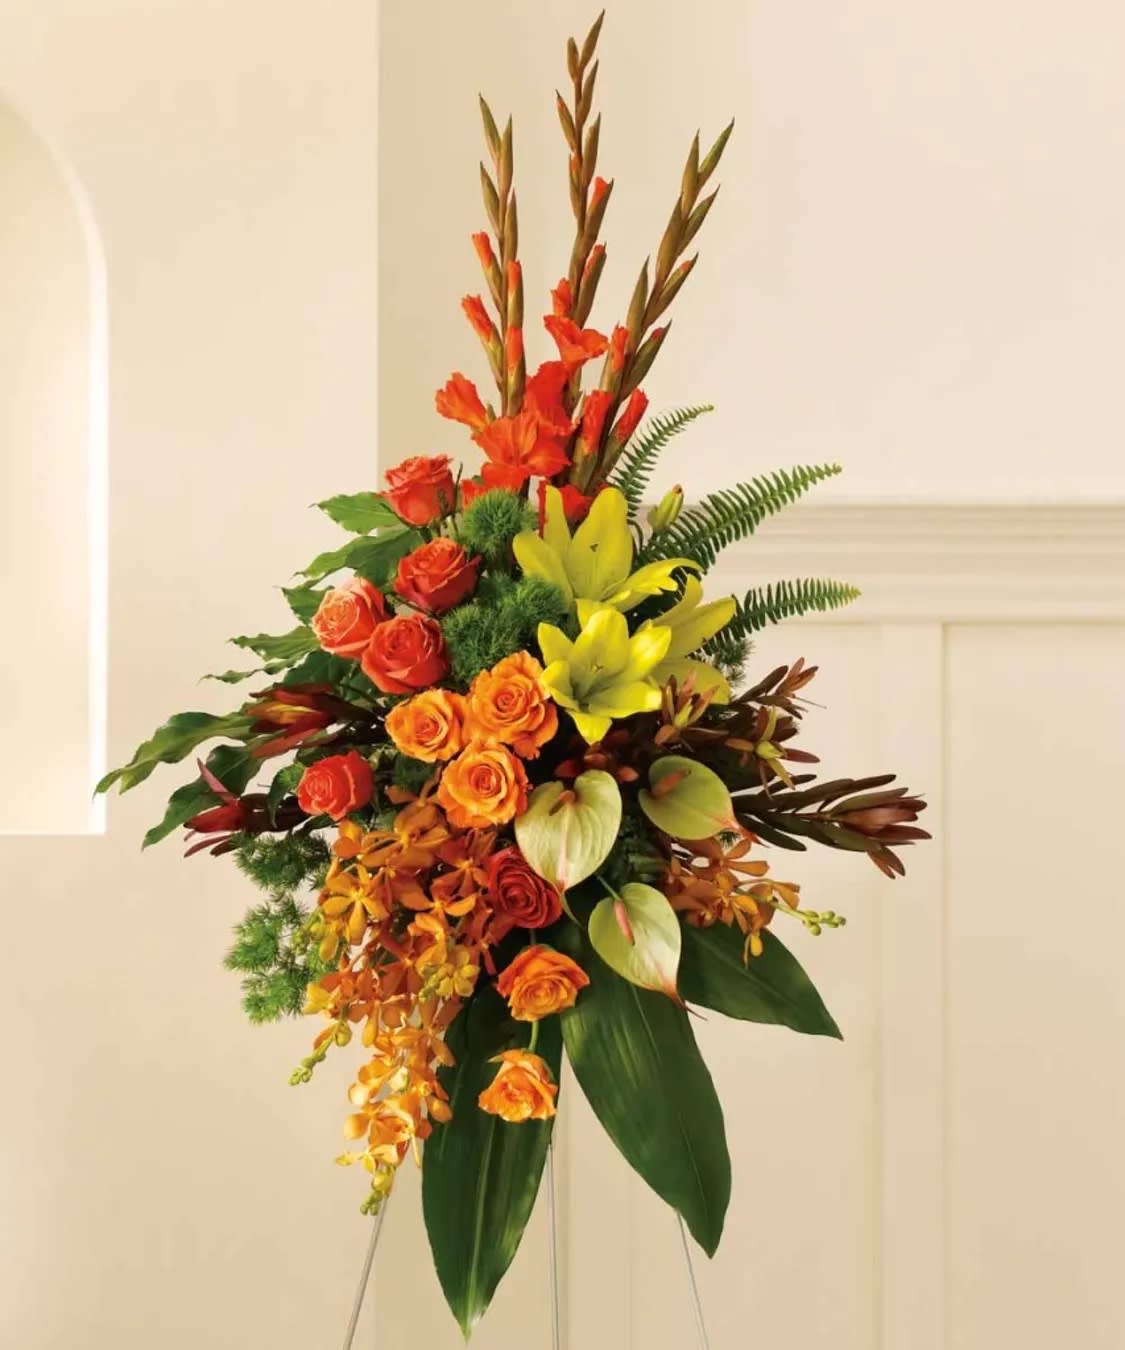 Tropical Tribute Spray - TROPICAL TRIBUTE SPRAY A graceful modern funeral spray of warm colors, it includes flowers such as anthuriums, roses and tropical greenery. Presented as a standing easel display. This standing spray on a wire easel includes tropical flowers such as orange orchids, roses and red gladioli. It also may include asiatic lilies, anthuriums, tropical ferns and leaves. Approximately 29&quot; W x 46&quot; H